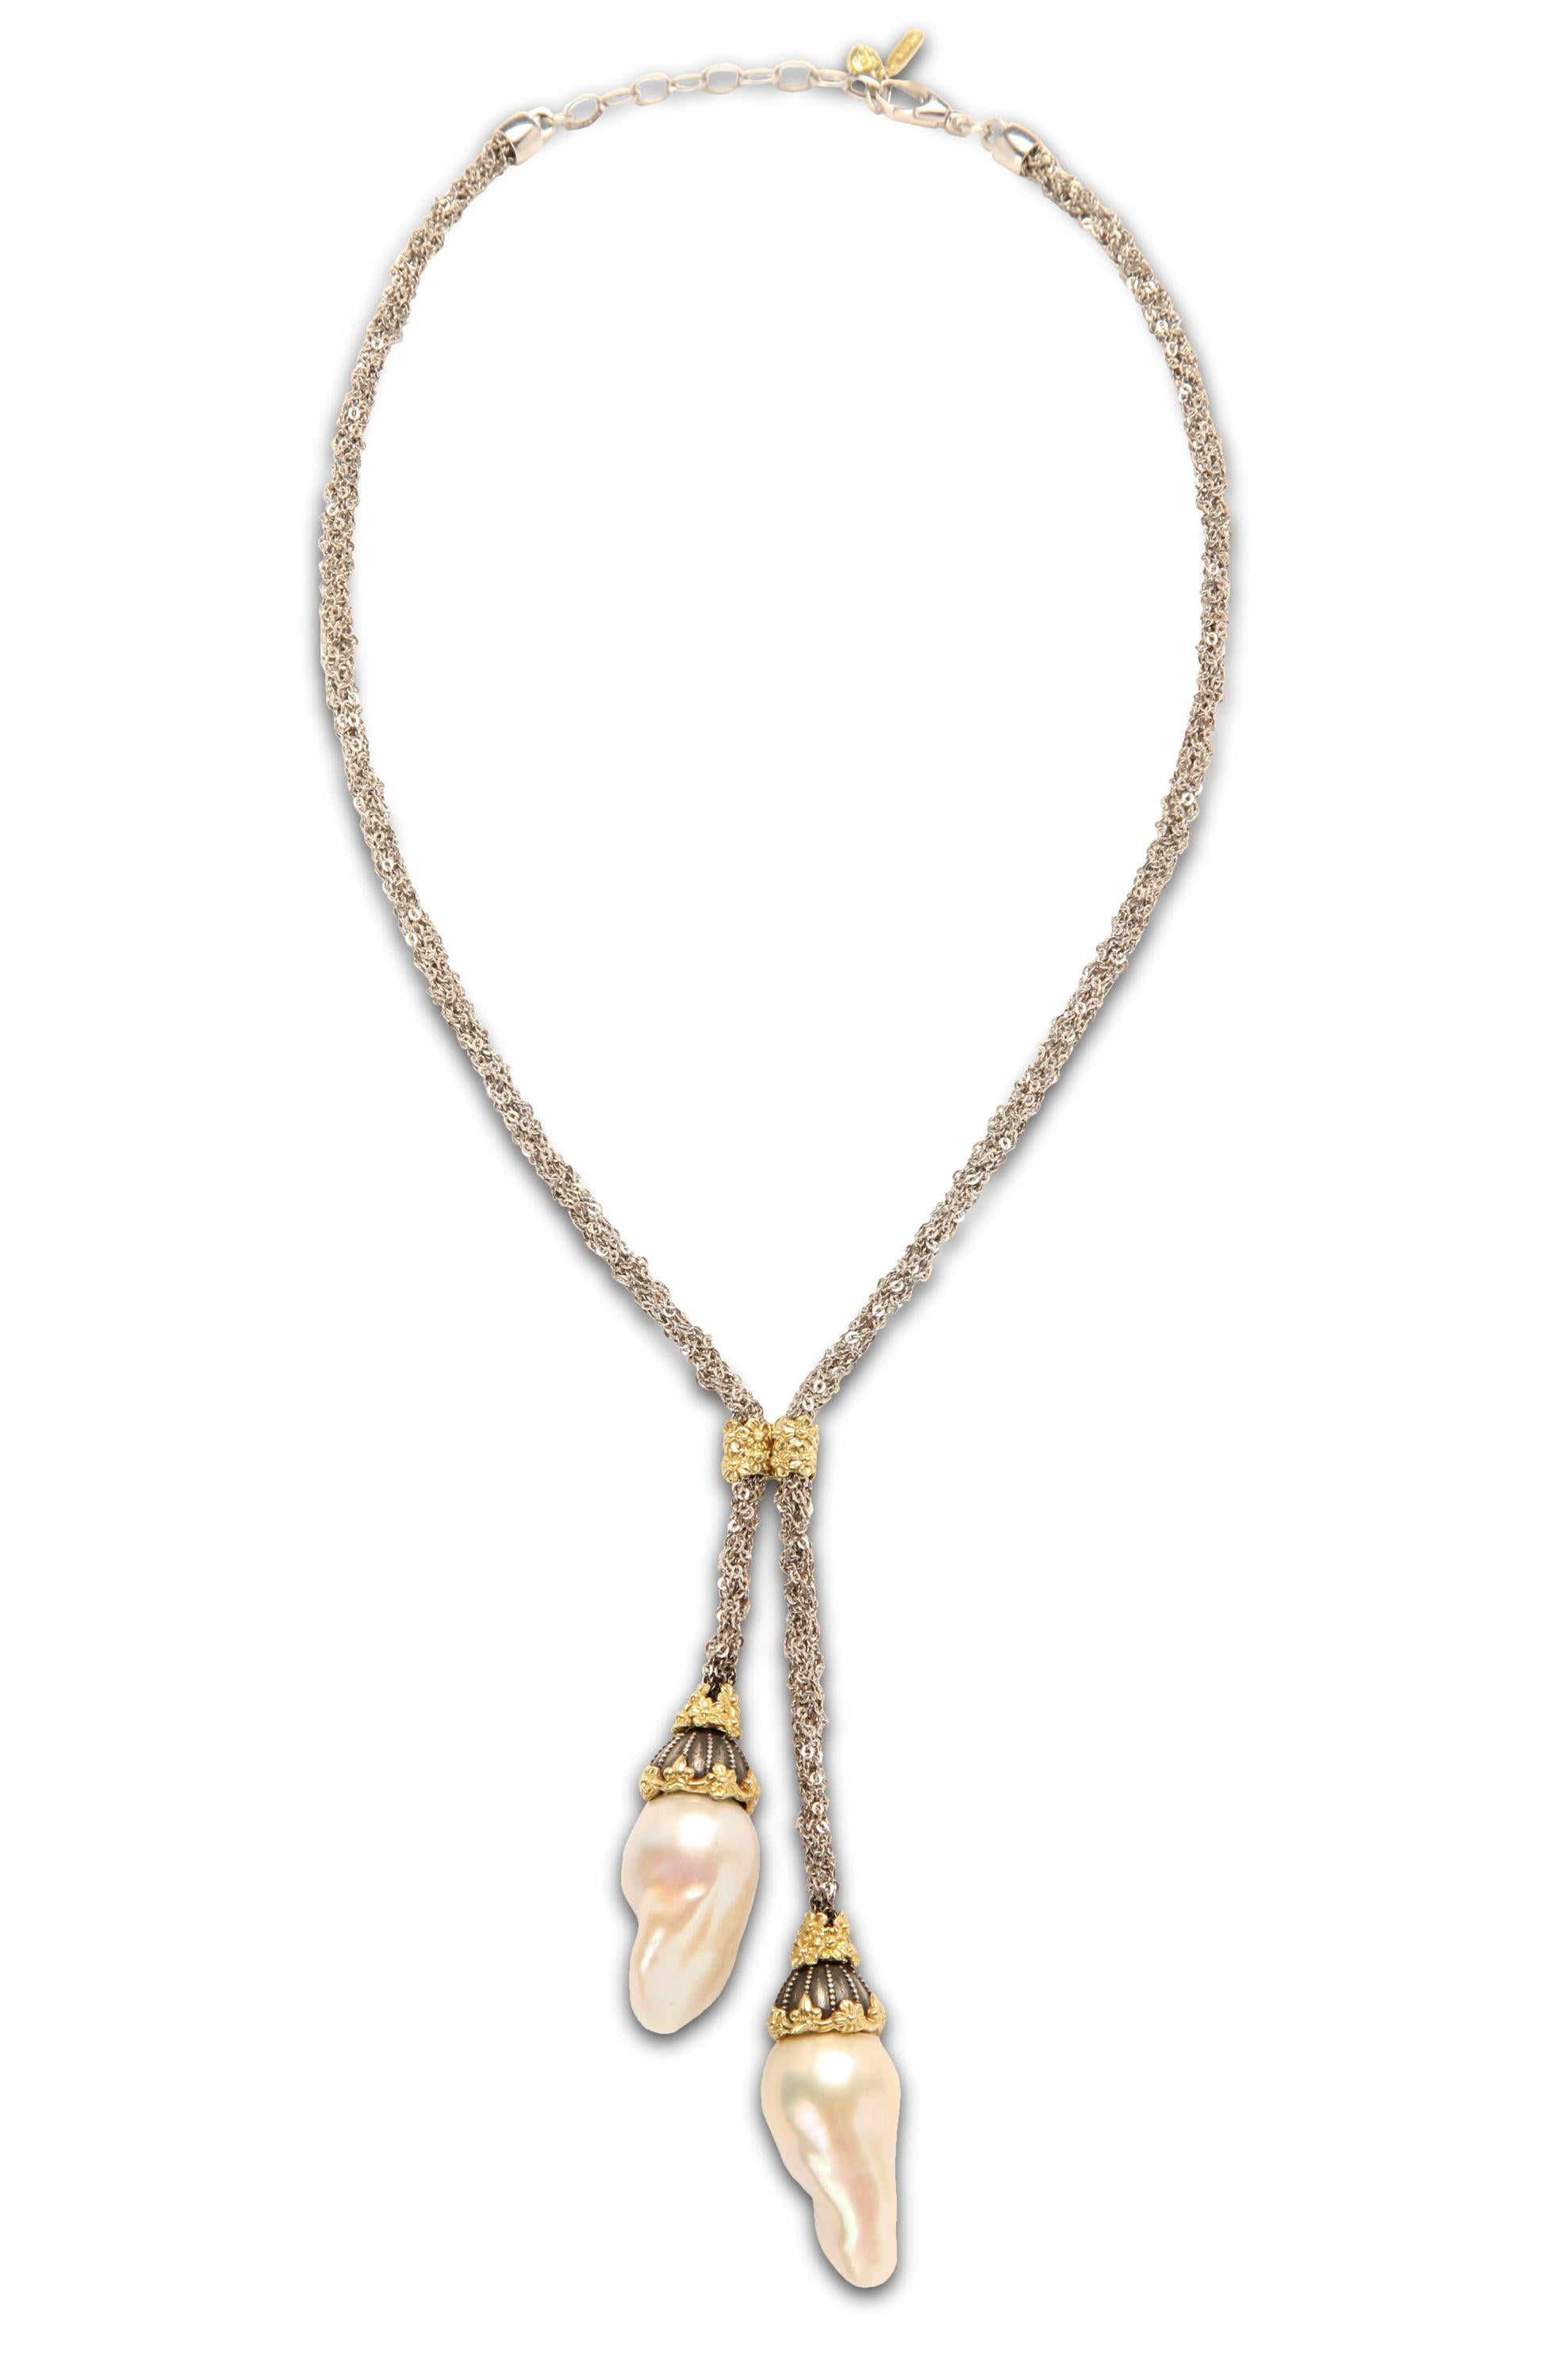 Silver and 18K Gold Lariat Necklace with Two Baroque Pearl Drops by Stambolian

This unique necklaces features a gorgeous mesh type chain that is connected in the center by a gold floral design

The design leads to two drops with fresh water baroque